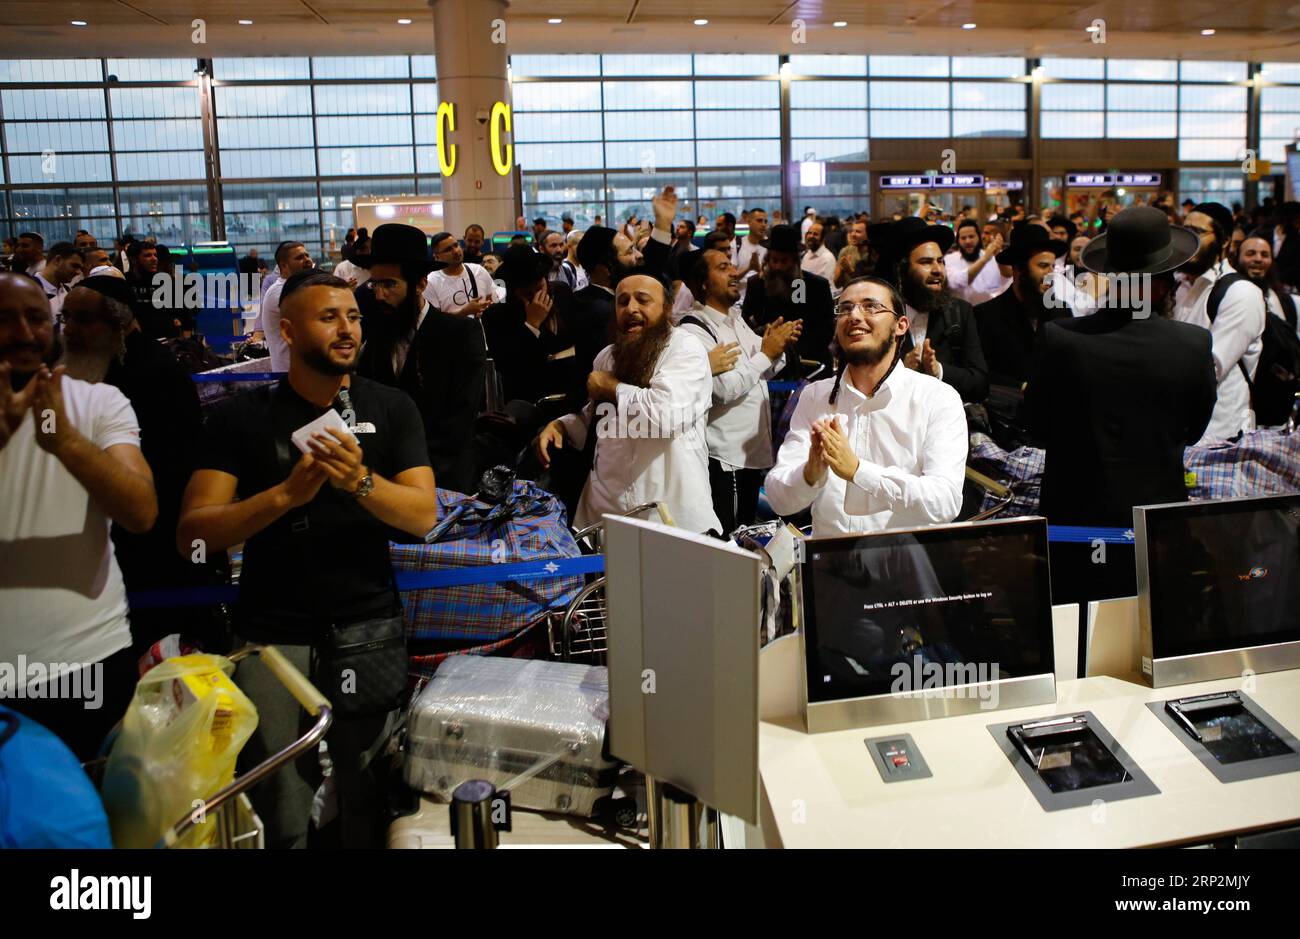 (180907) -- TEL AVIV, Sept. 7, 2018 -- Ultra-orthodox Jewish men from Breslov sect dance and sing as they check in to flights headed for Ukrainian city of Uman at Ben-Gurion International Airport near Tel Aviv, Israel, on Sept. 6, 2018. On the Jewish New Year in September, tens of thousands of religious Jews will fly to Uman to pray at the grave of Rabbi Nachman of Breslov, who founded the Hasidic Jewish movement named after him at the end of the 18th century. ) (yk) ISRAEL-BEN GURION AIRPORT-ORTHODOX JEW-PILGRIMS GilxCohenxMagen PUBLICATIONxNOTxINxCHN Stock Photo